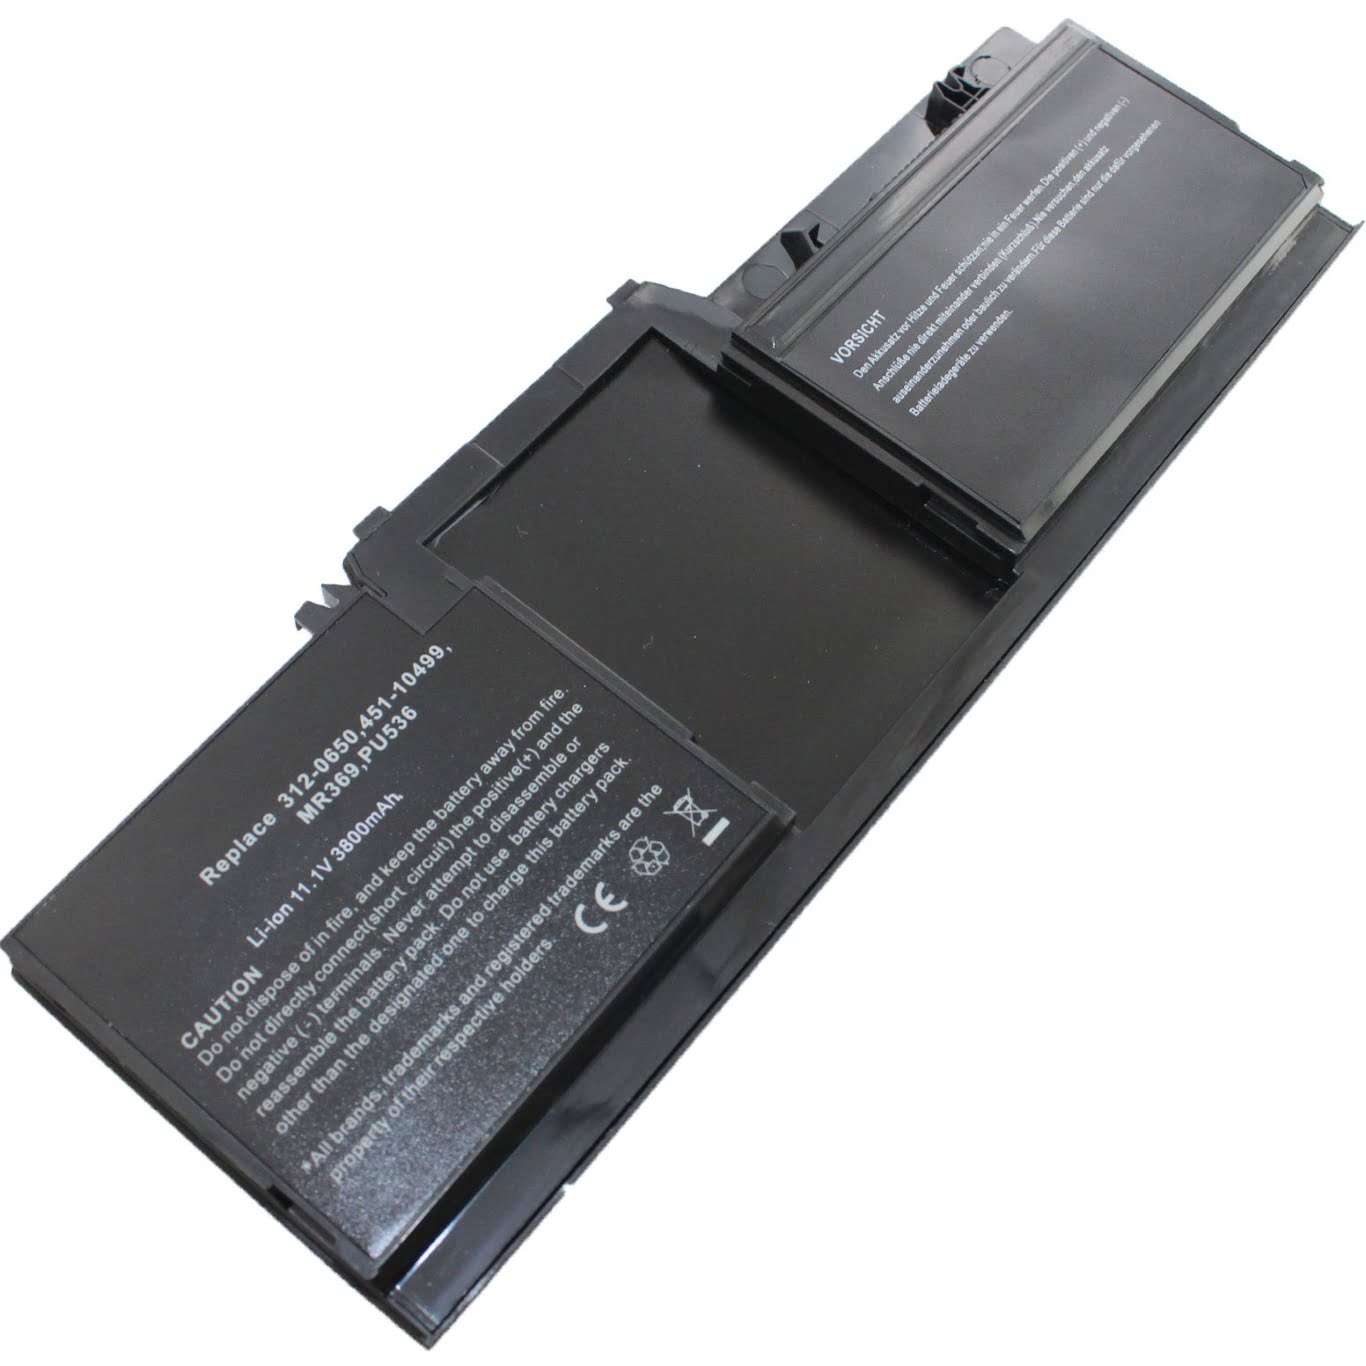 0FW273, 0J927H replacement Laptop Battery for Dell Latitude XT Tablet PC, Latitude XT2 Tablet PC, 11.1V, 3800mAh